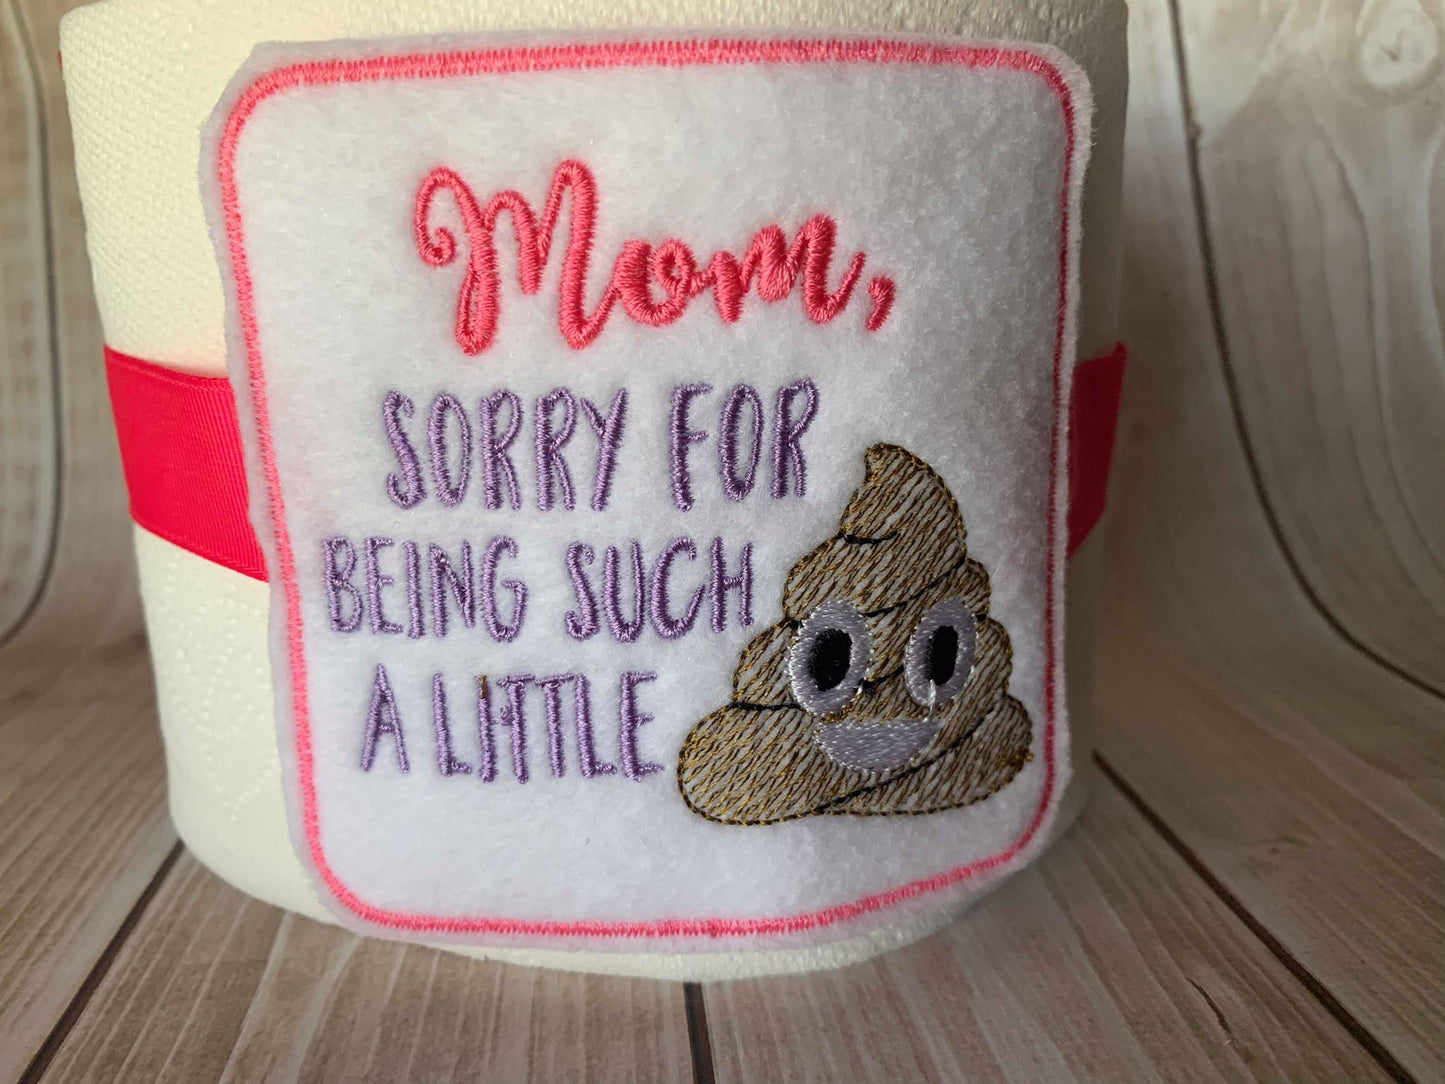 Sorry For being such a little Poop - TP tie- 4x4 - Embroidery Design - DIGITAL Embroidery DESIGN